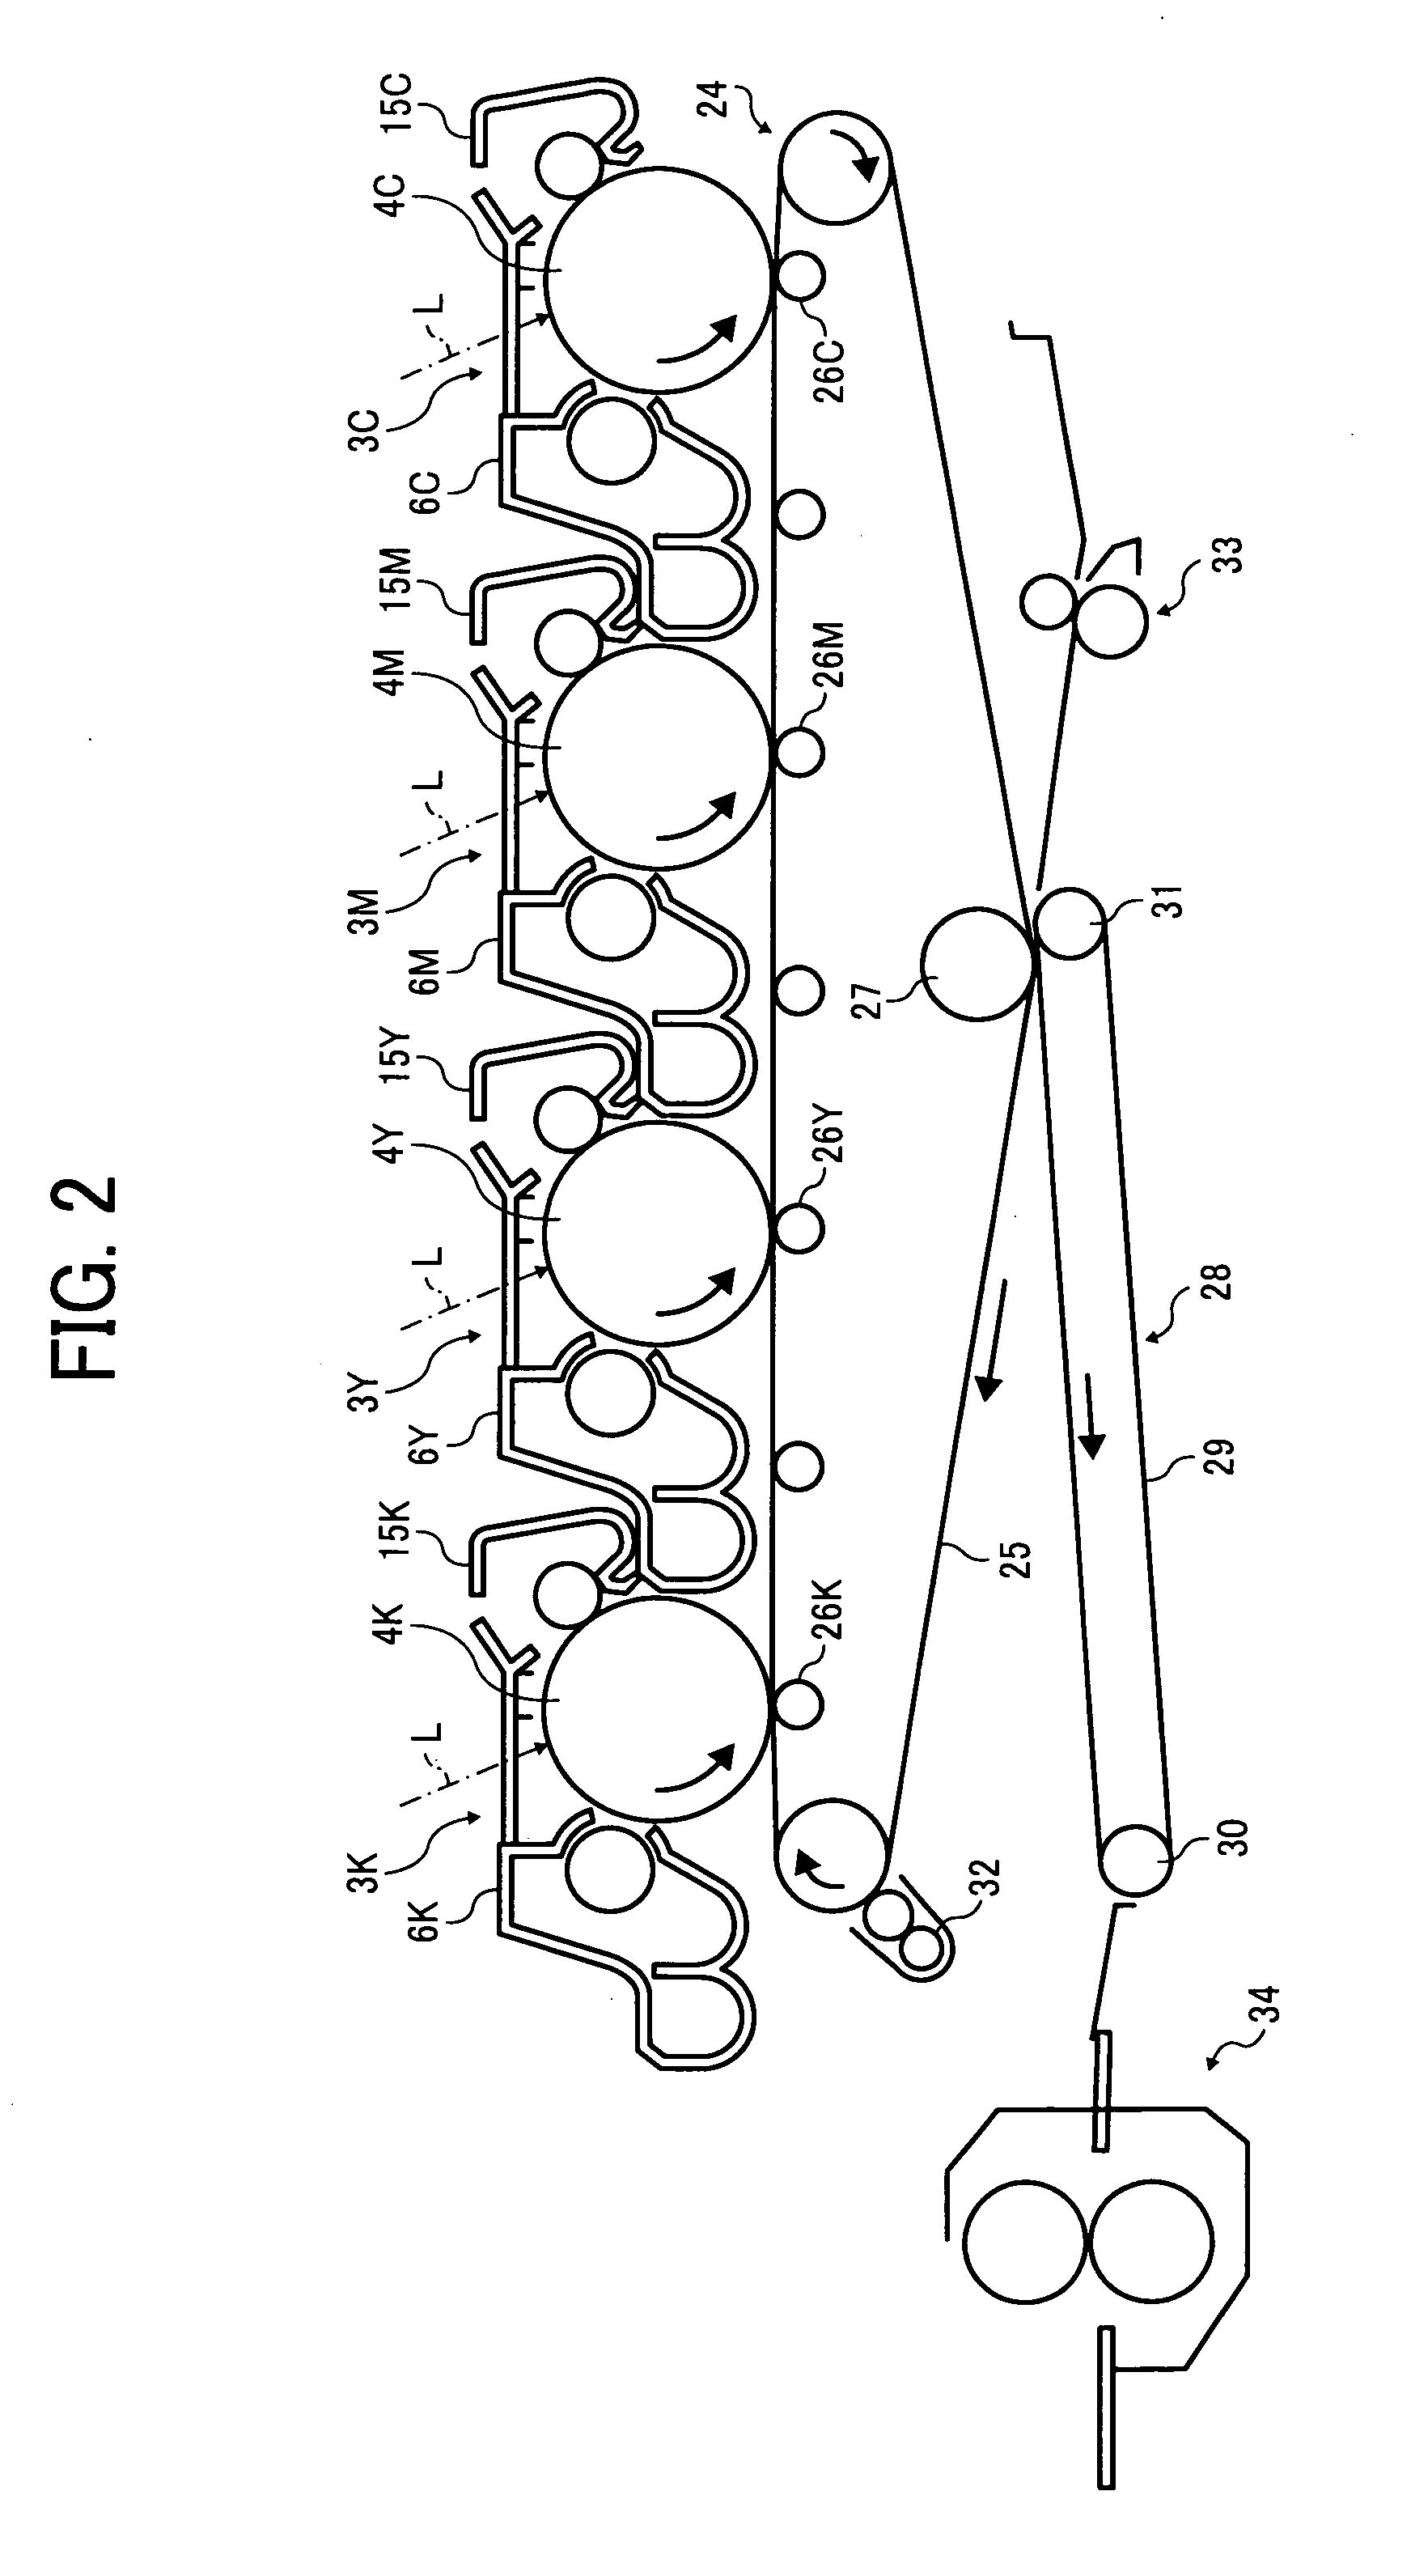 Deep focus image reading system and image forming apparatus